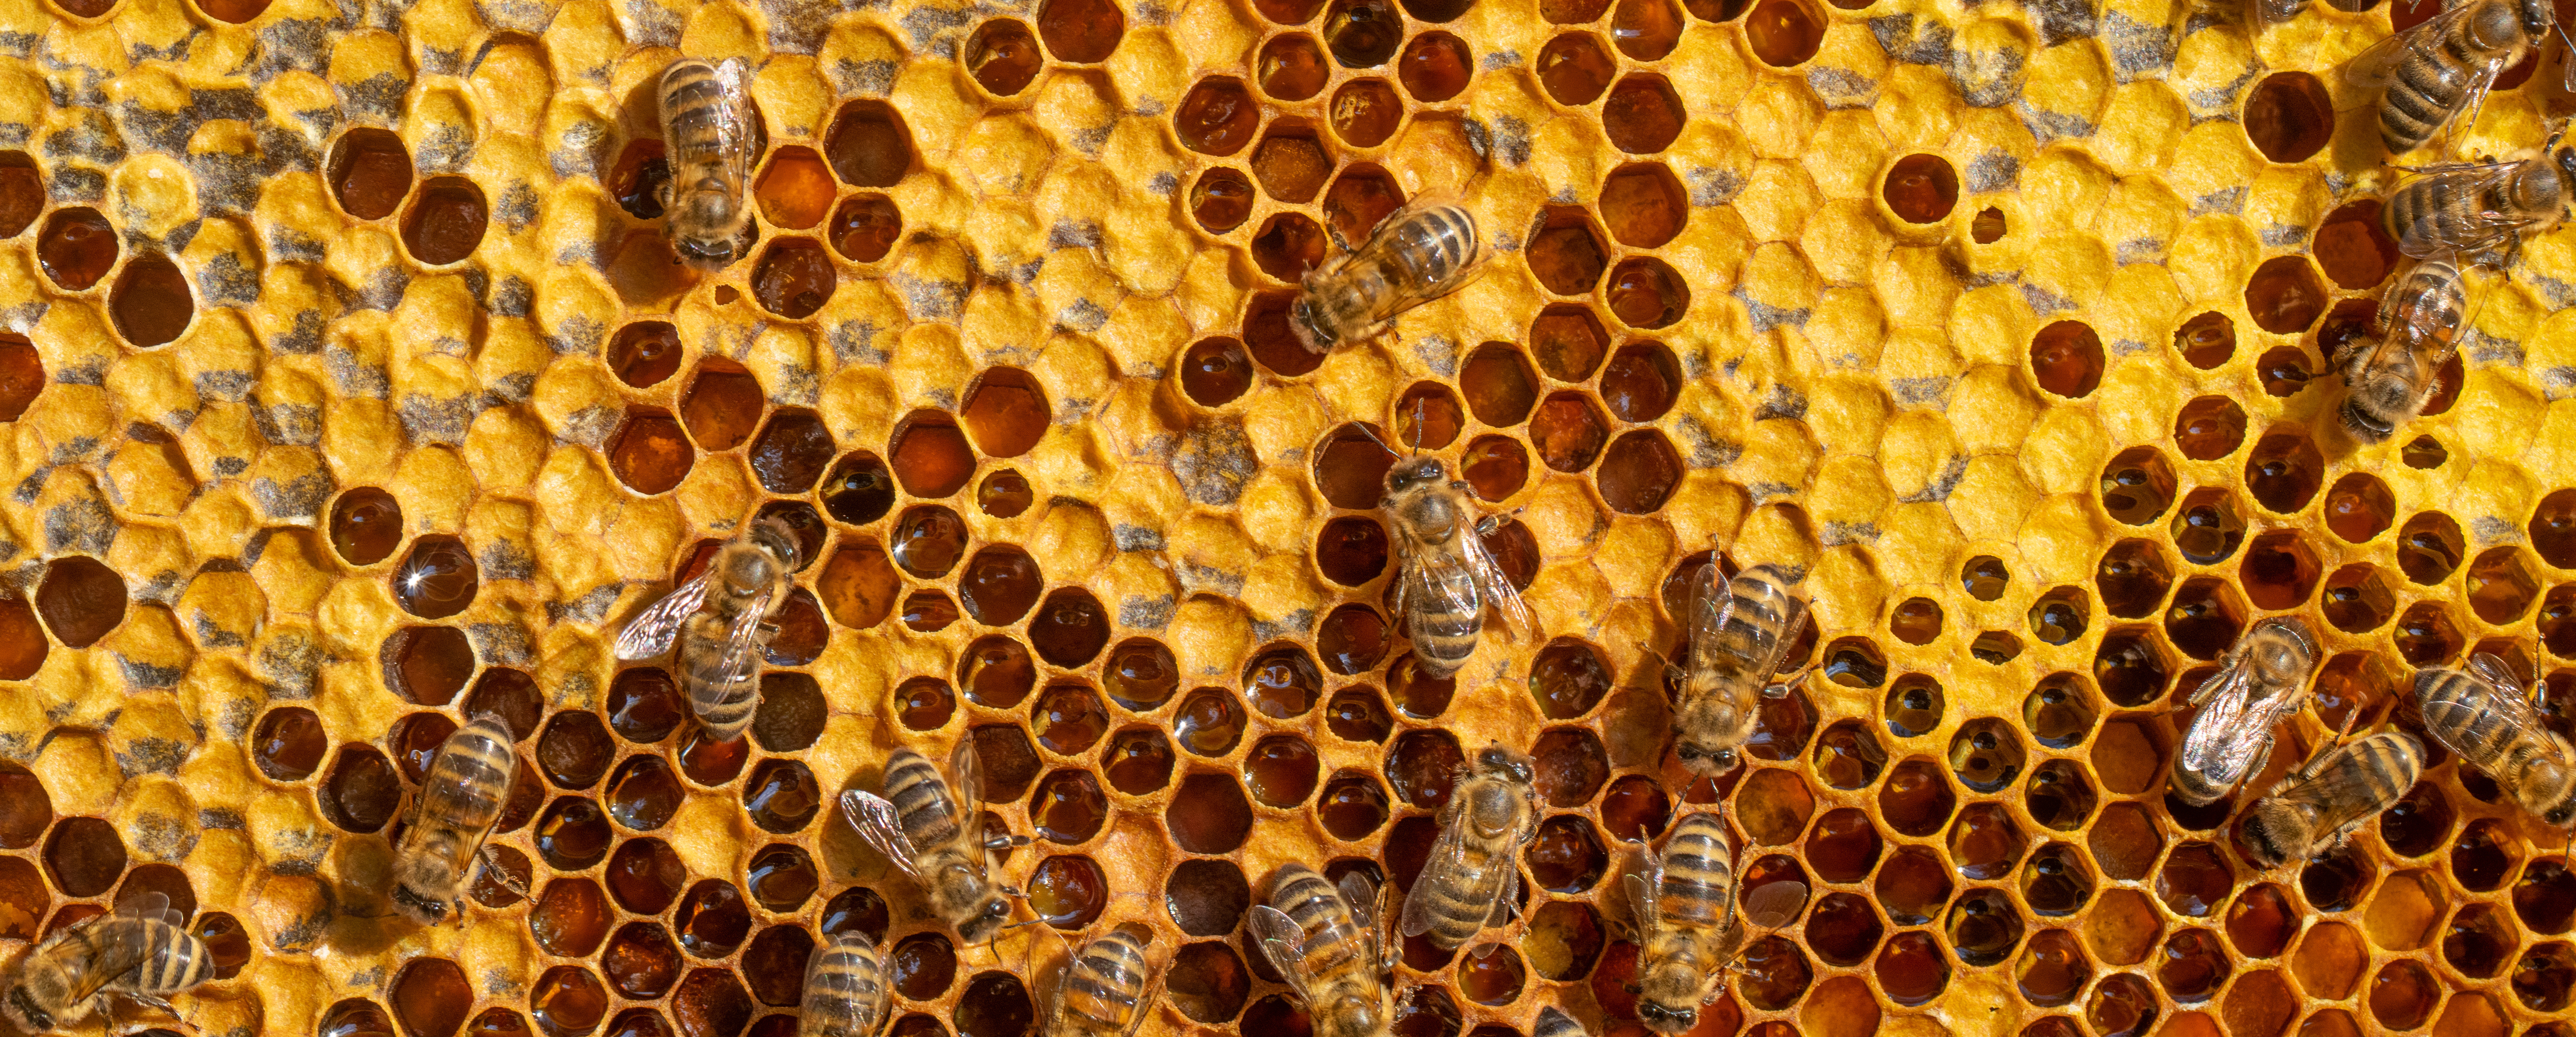 honeybees on a comb